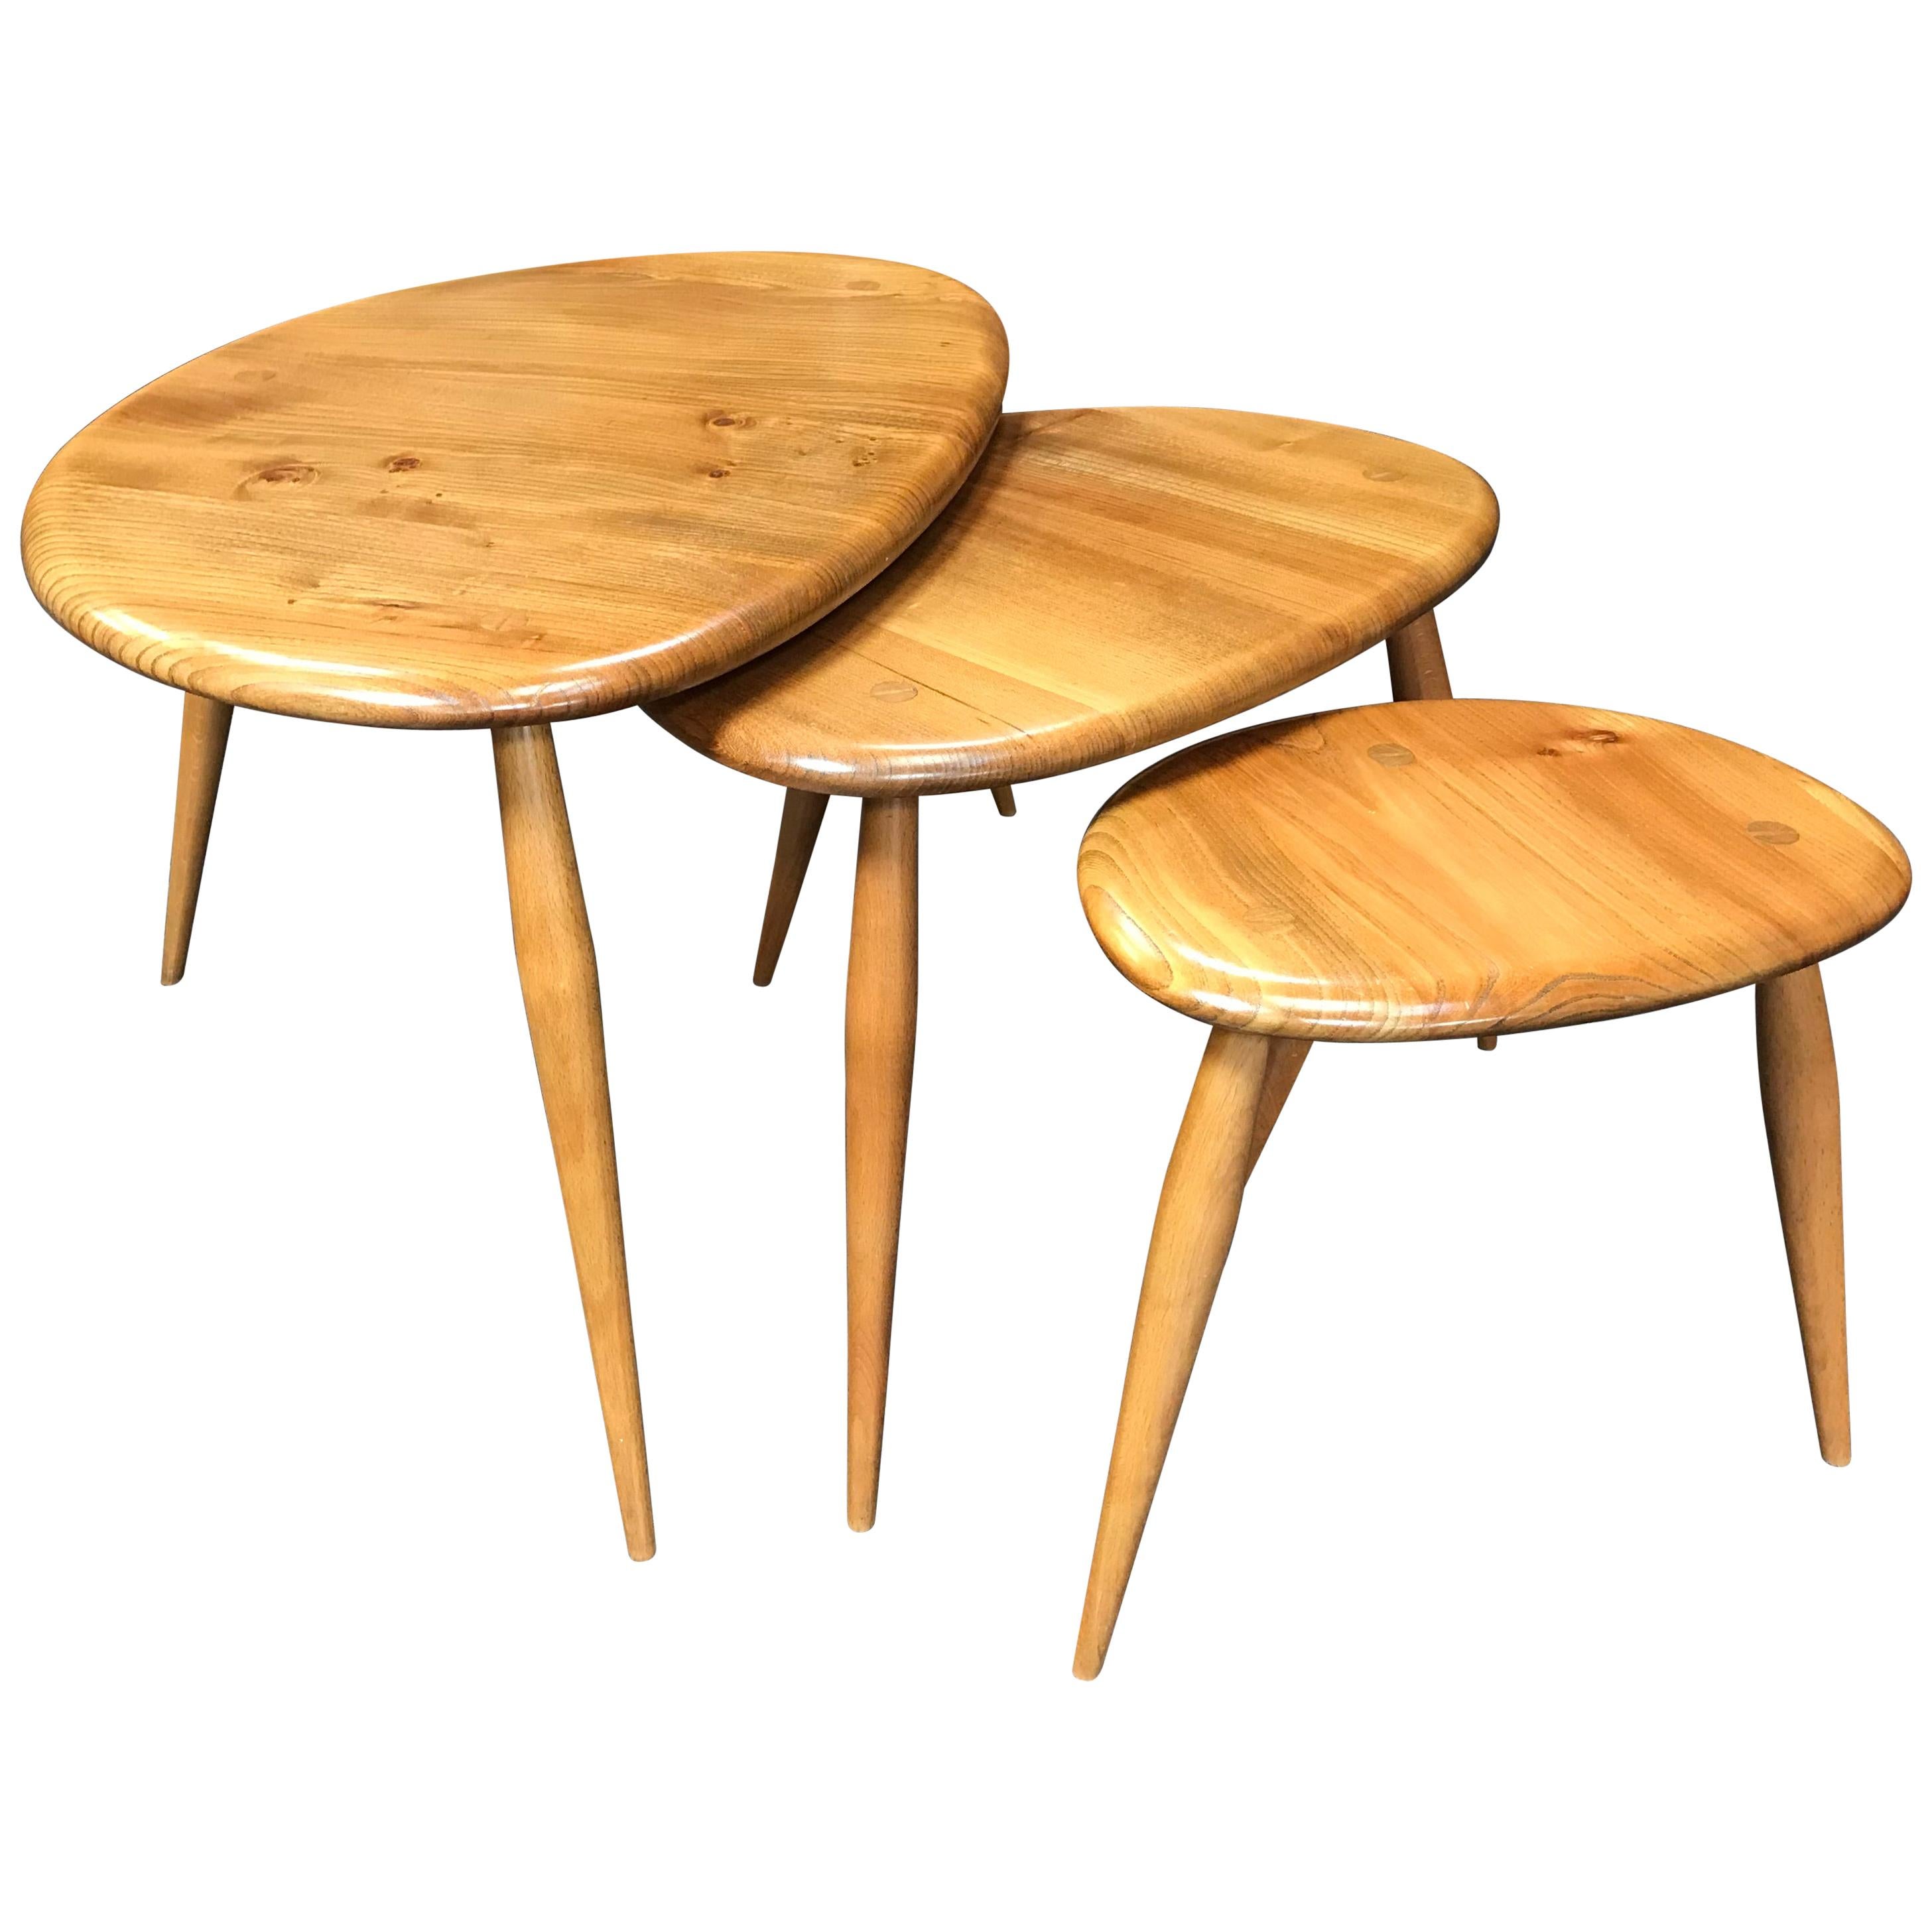 Blonde Nest of Tables, Pebbles by Lucian Ercolani for Ercol, Elm and Beech For Sale